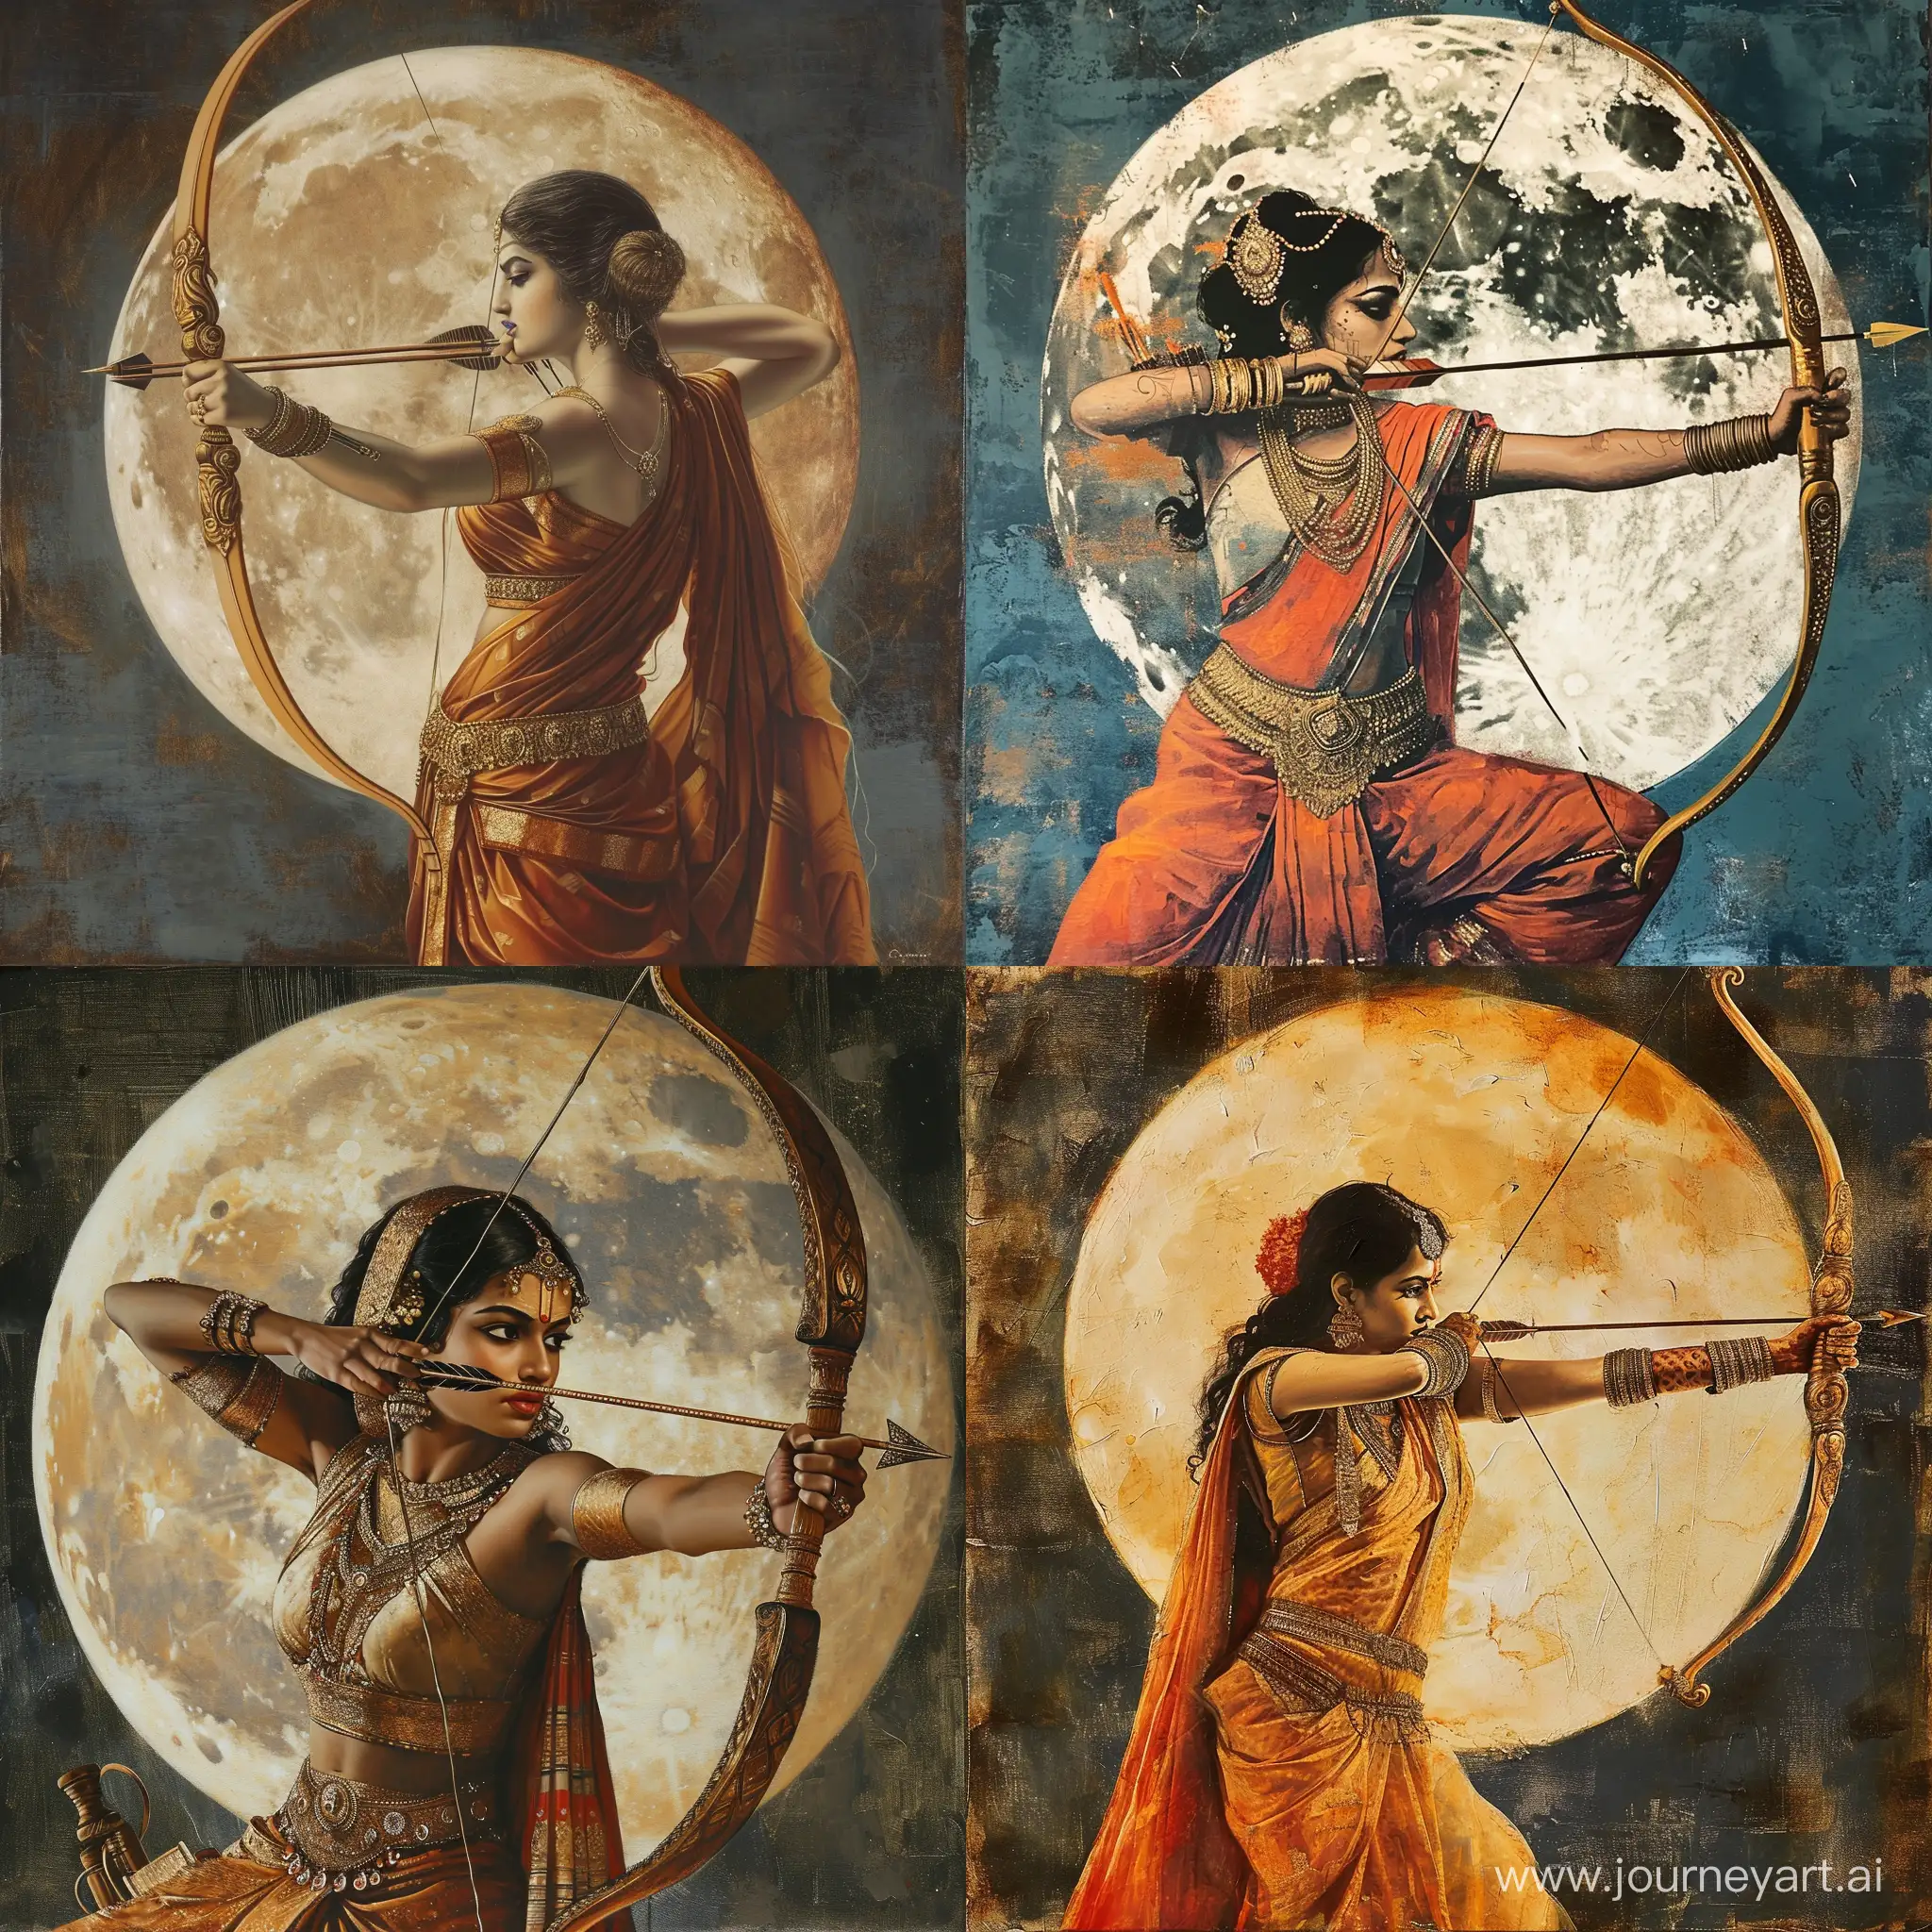 Divine-Portrait-Majestic-Lord-Ram-with-Bow-and-Arrow-Under-the-Moon